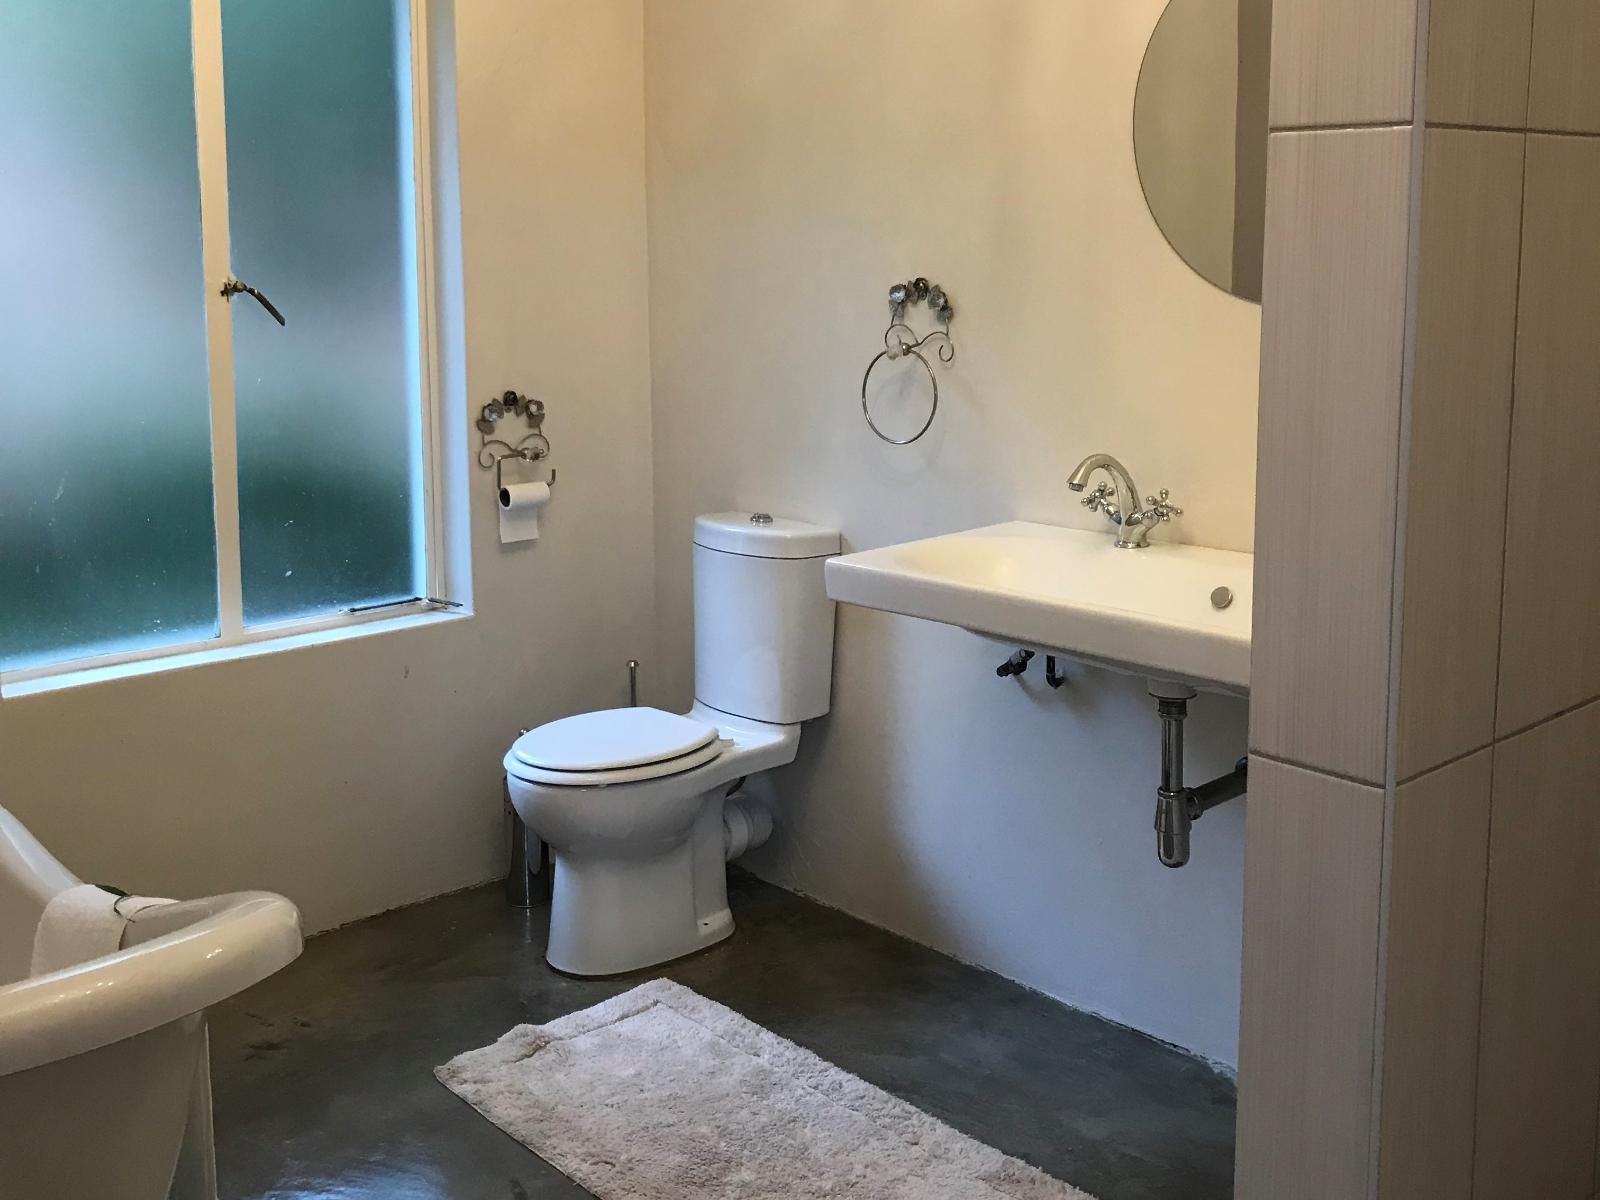 Calla Lily Guesthouse Sonheuwel Central Nelspruit Mpumalanga South Africa Bathroom